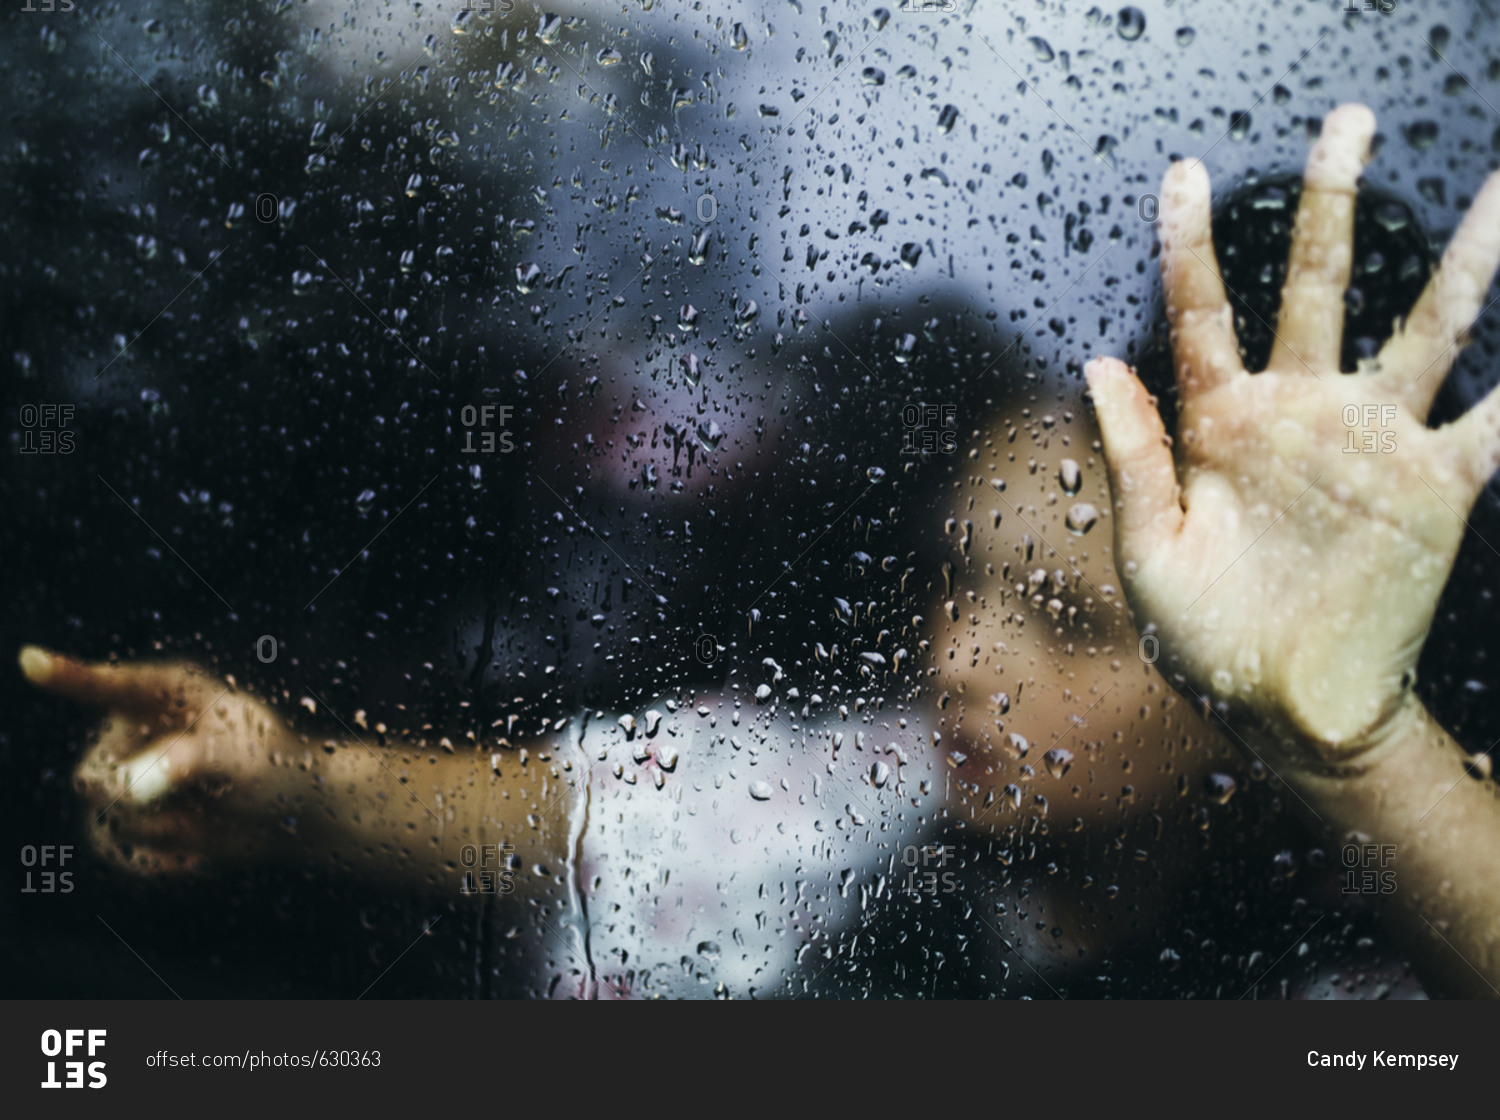 Little girl pointing behind rain covered window